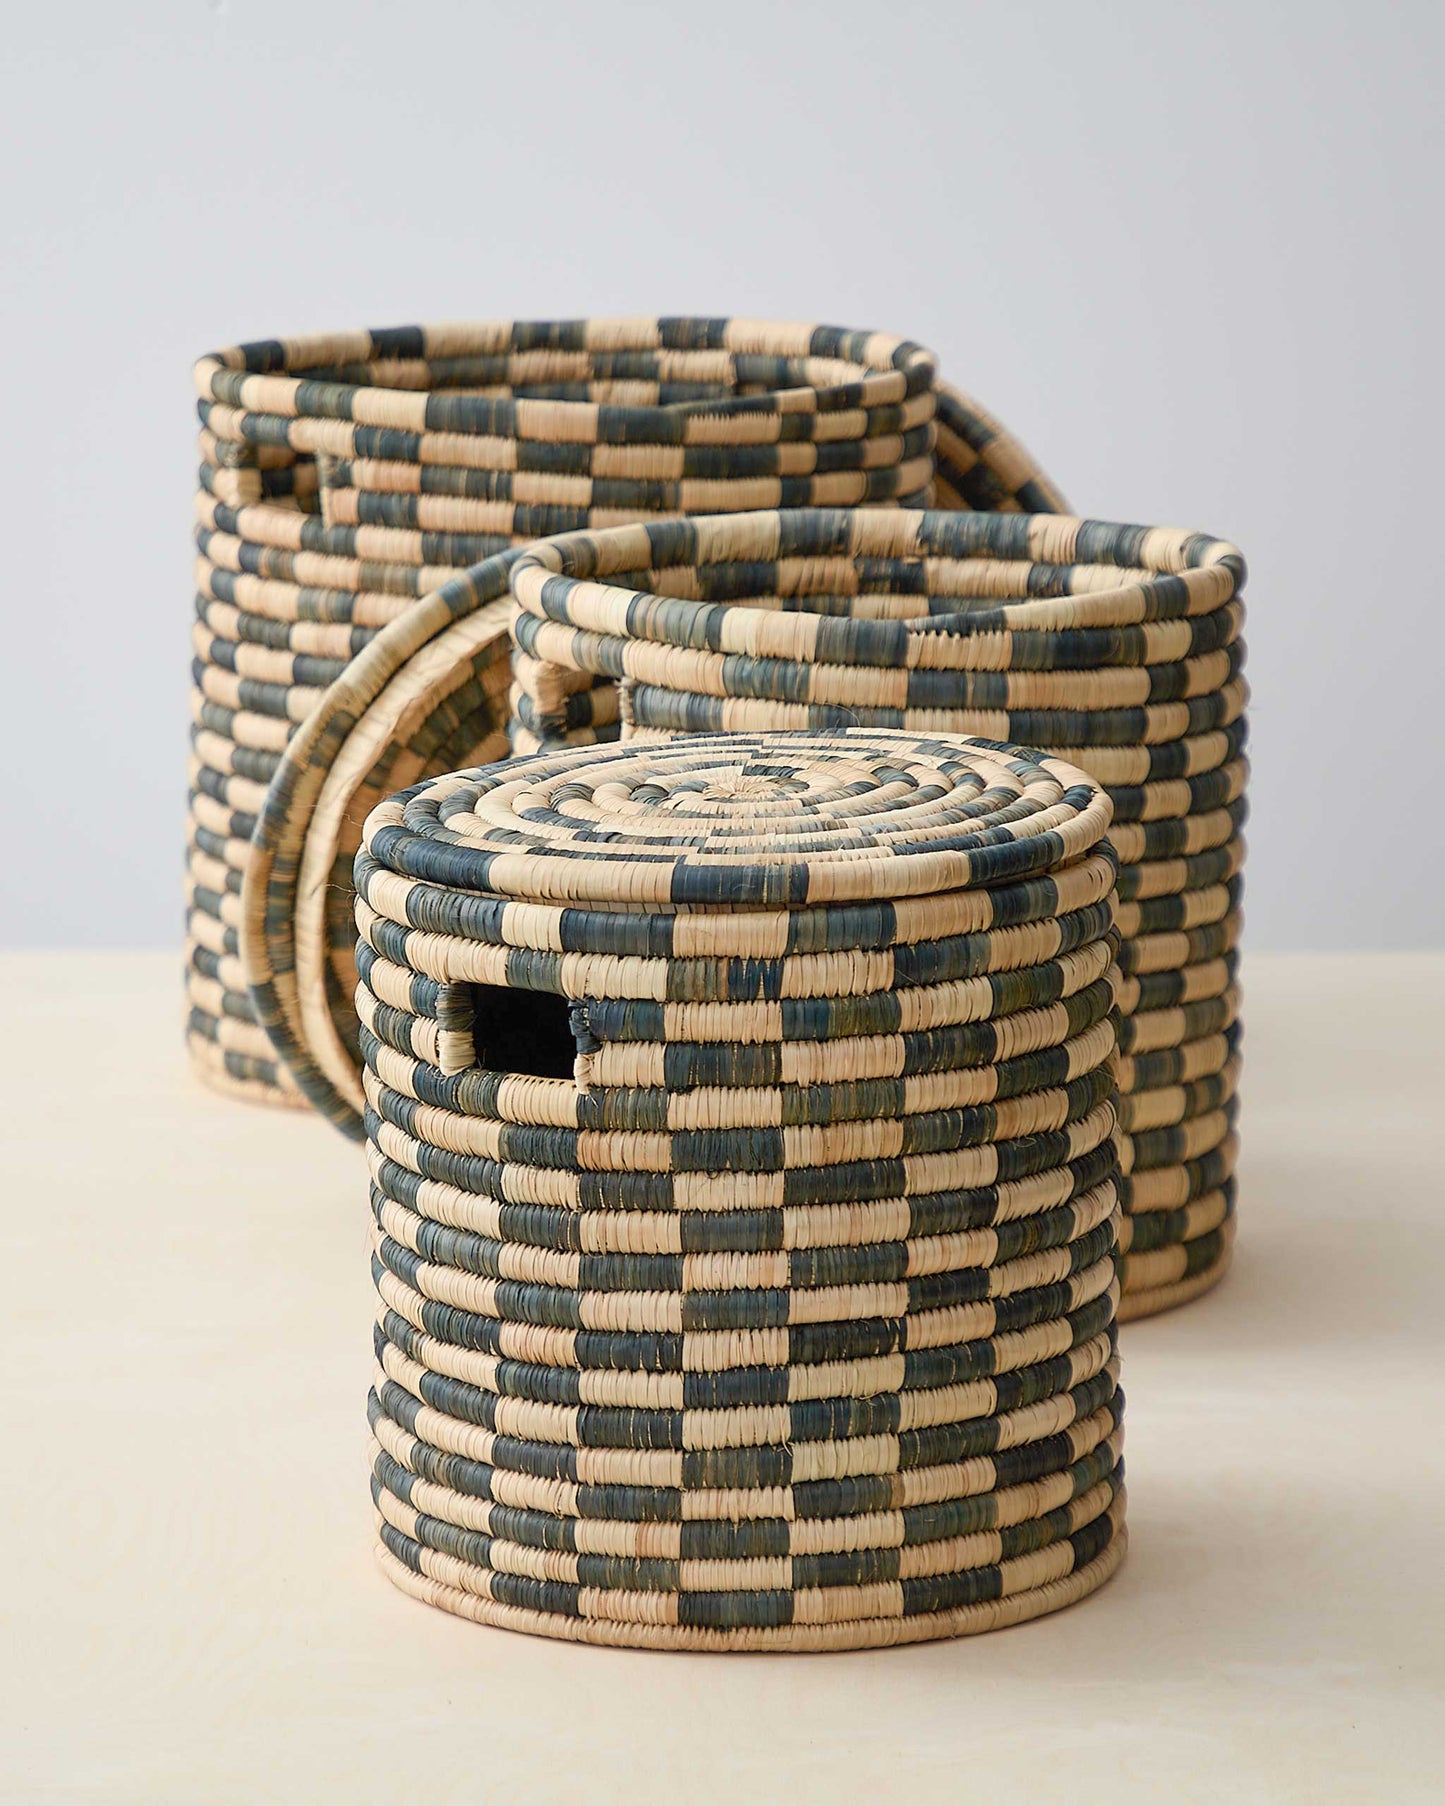 Azibo Storage Baskets by Fairkind. Handwoven with Ilala palm by master artisans in Malawi.